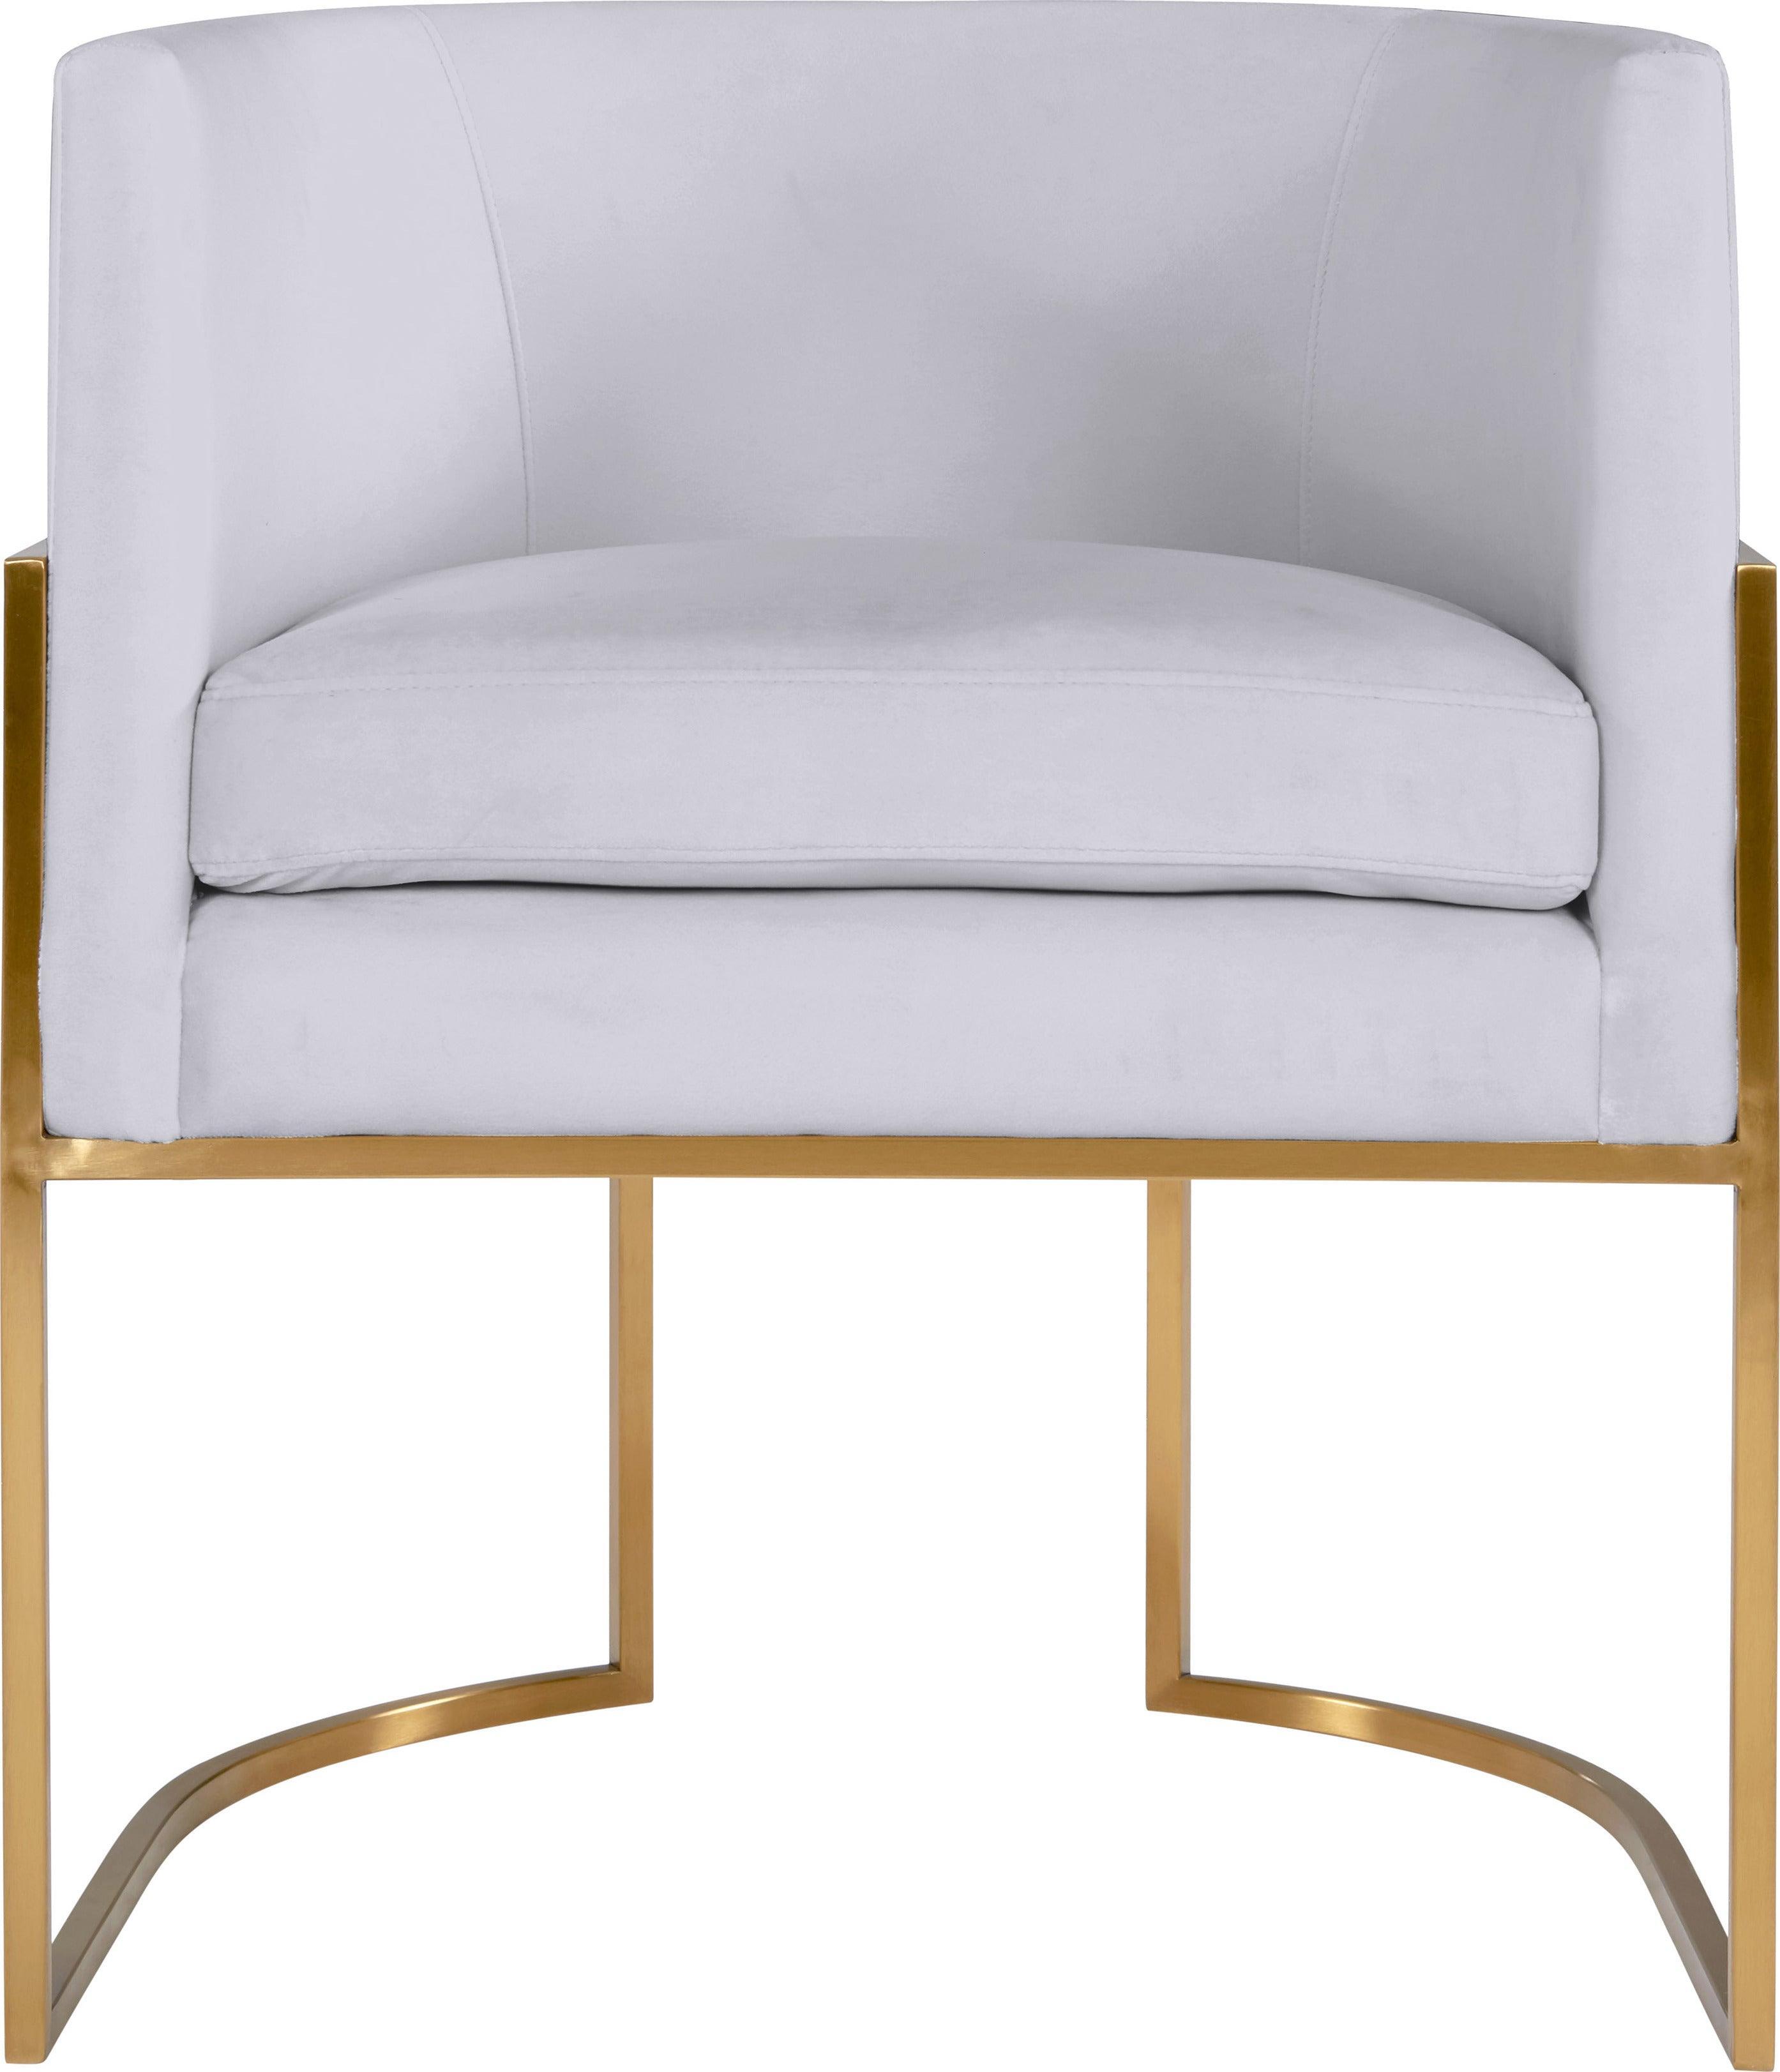 Tov Furniture Dining Chairs - Giselle Gray Velvet Dining Chair with Gold Leg